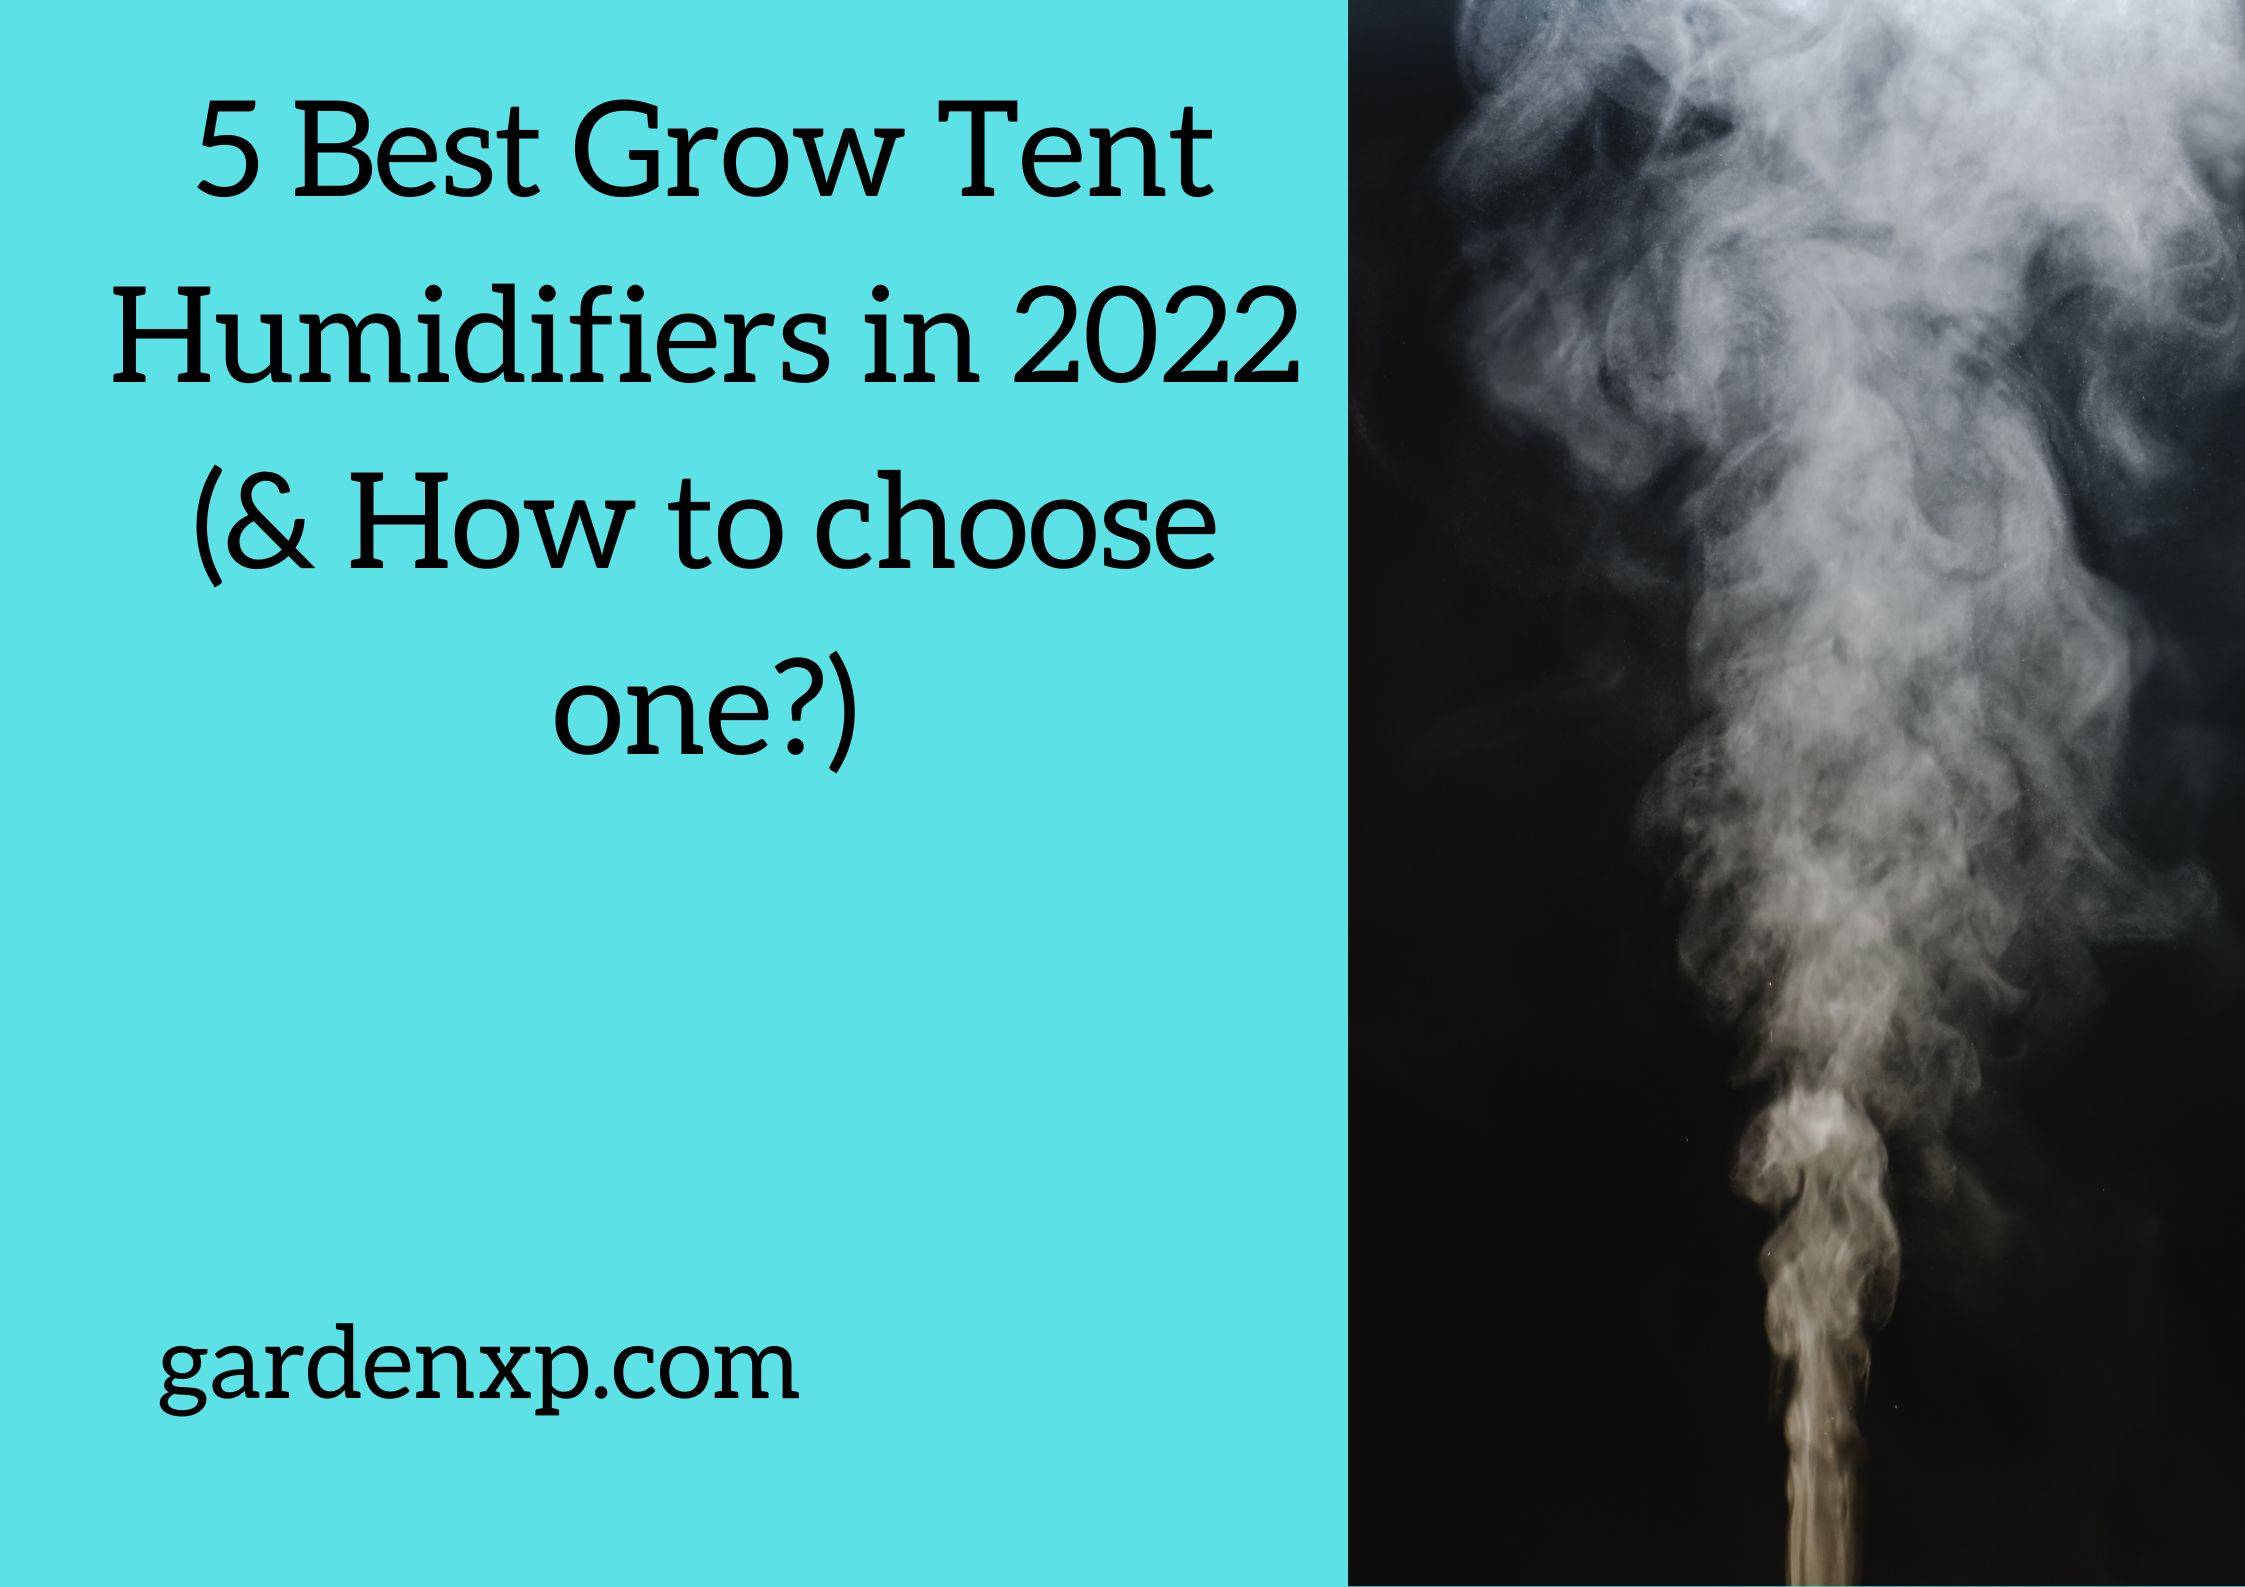 5 Best Grow Tent Humidifiers in 2022 (& How to choose one?)